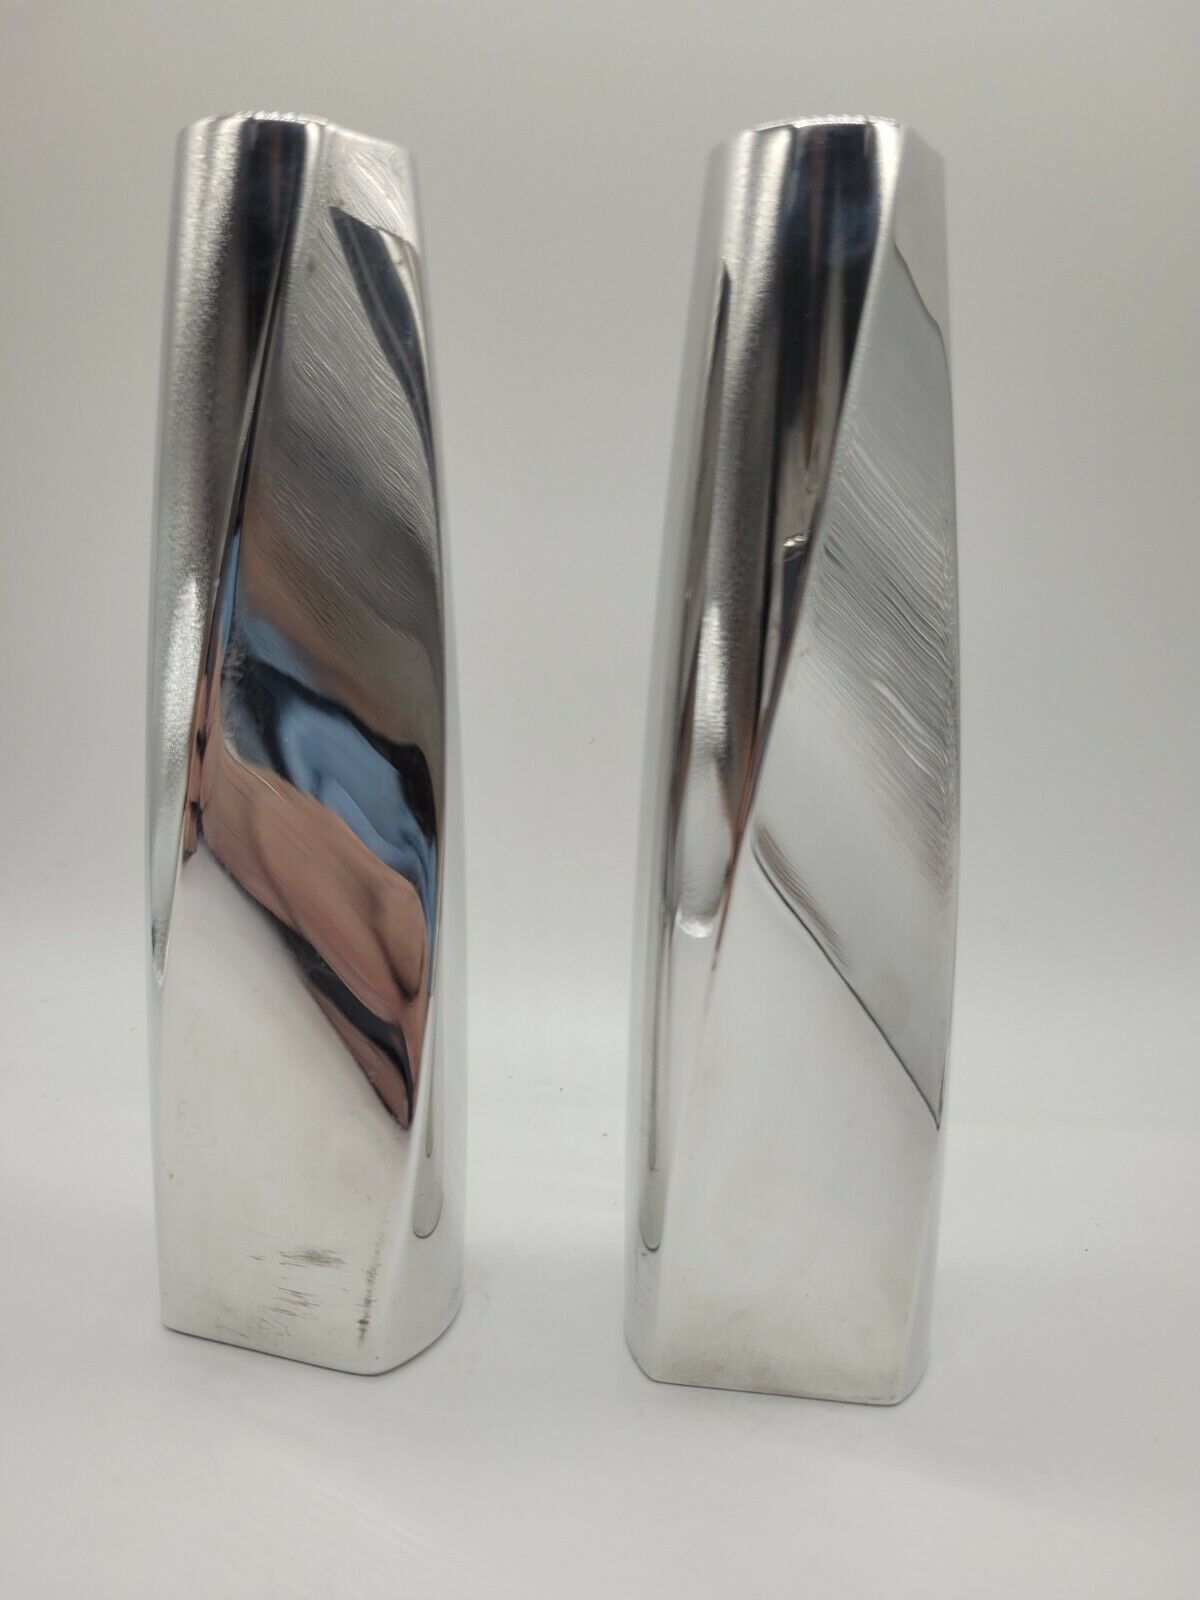 NAMBE Pair Twist Fred Bould 6236 Silver Candlesticks Holders 7” 2002 Pair Nambé NAMBE Twist Fred Bould 6236 - фотография #3